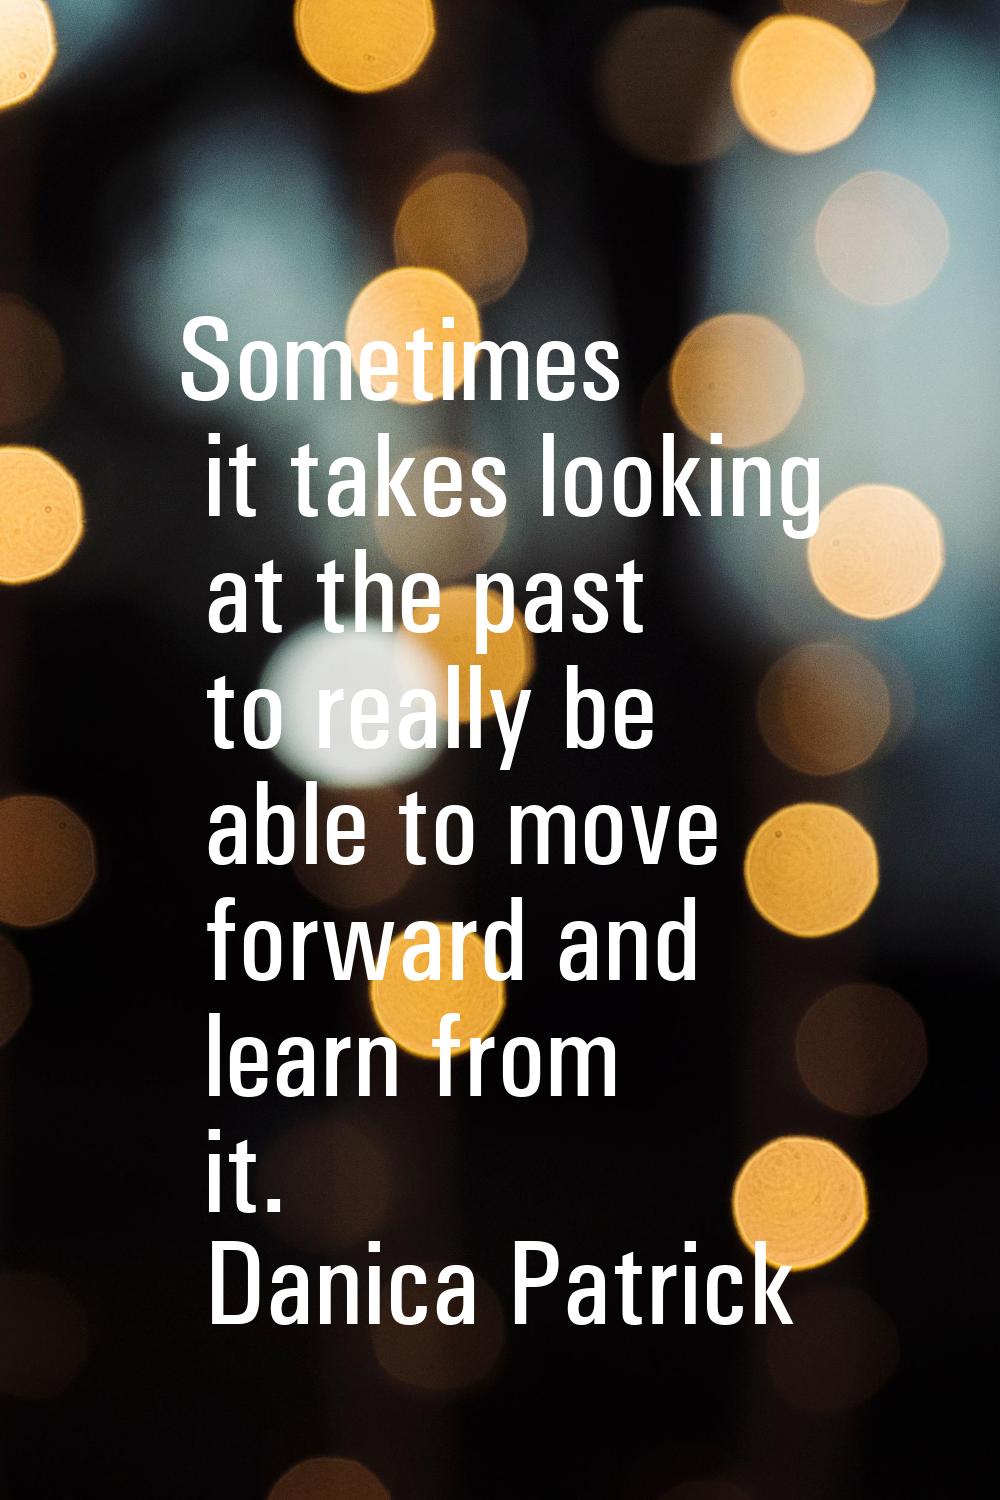 Sometimes it takes looking at the past to really be able to move forward and learn from it.